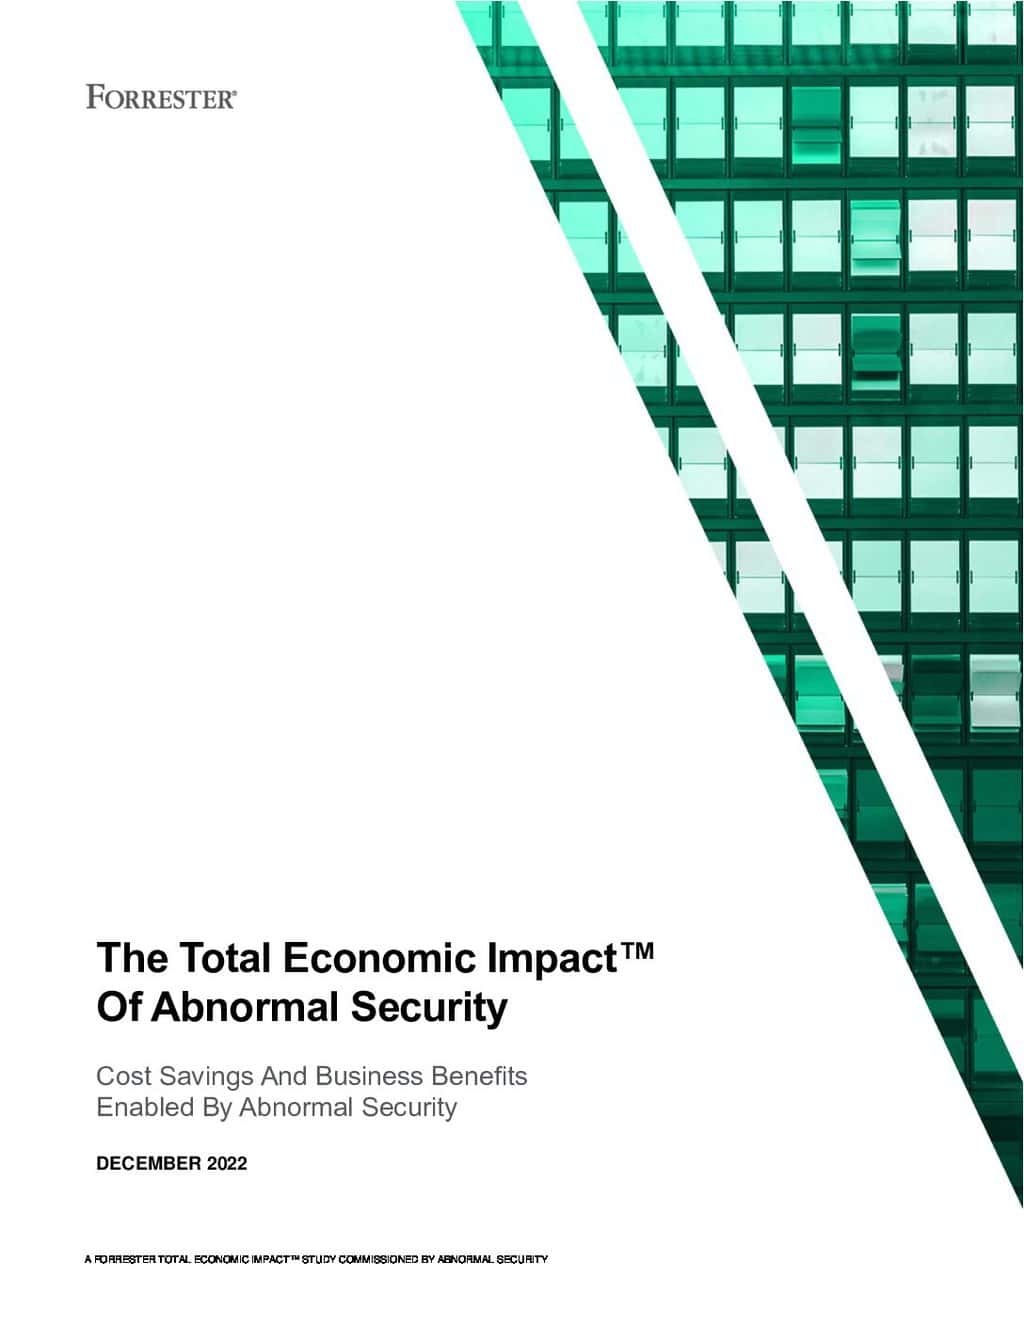 Total Economic Impact of Abnormal Security Report (Forrester)